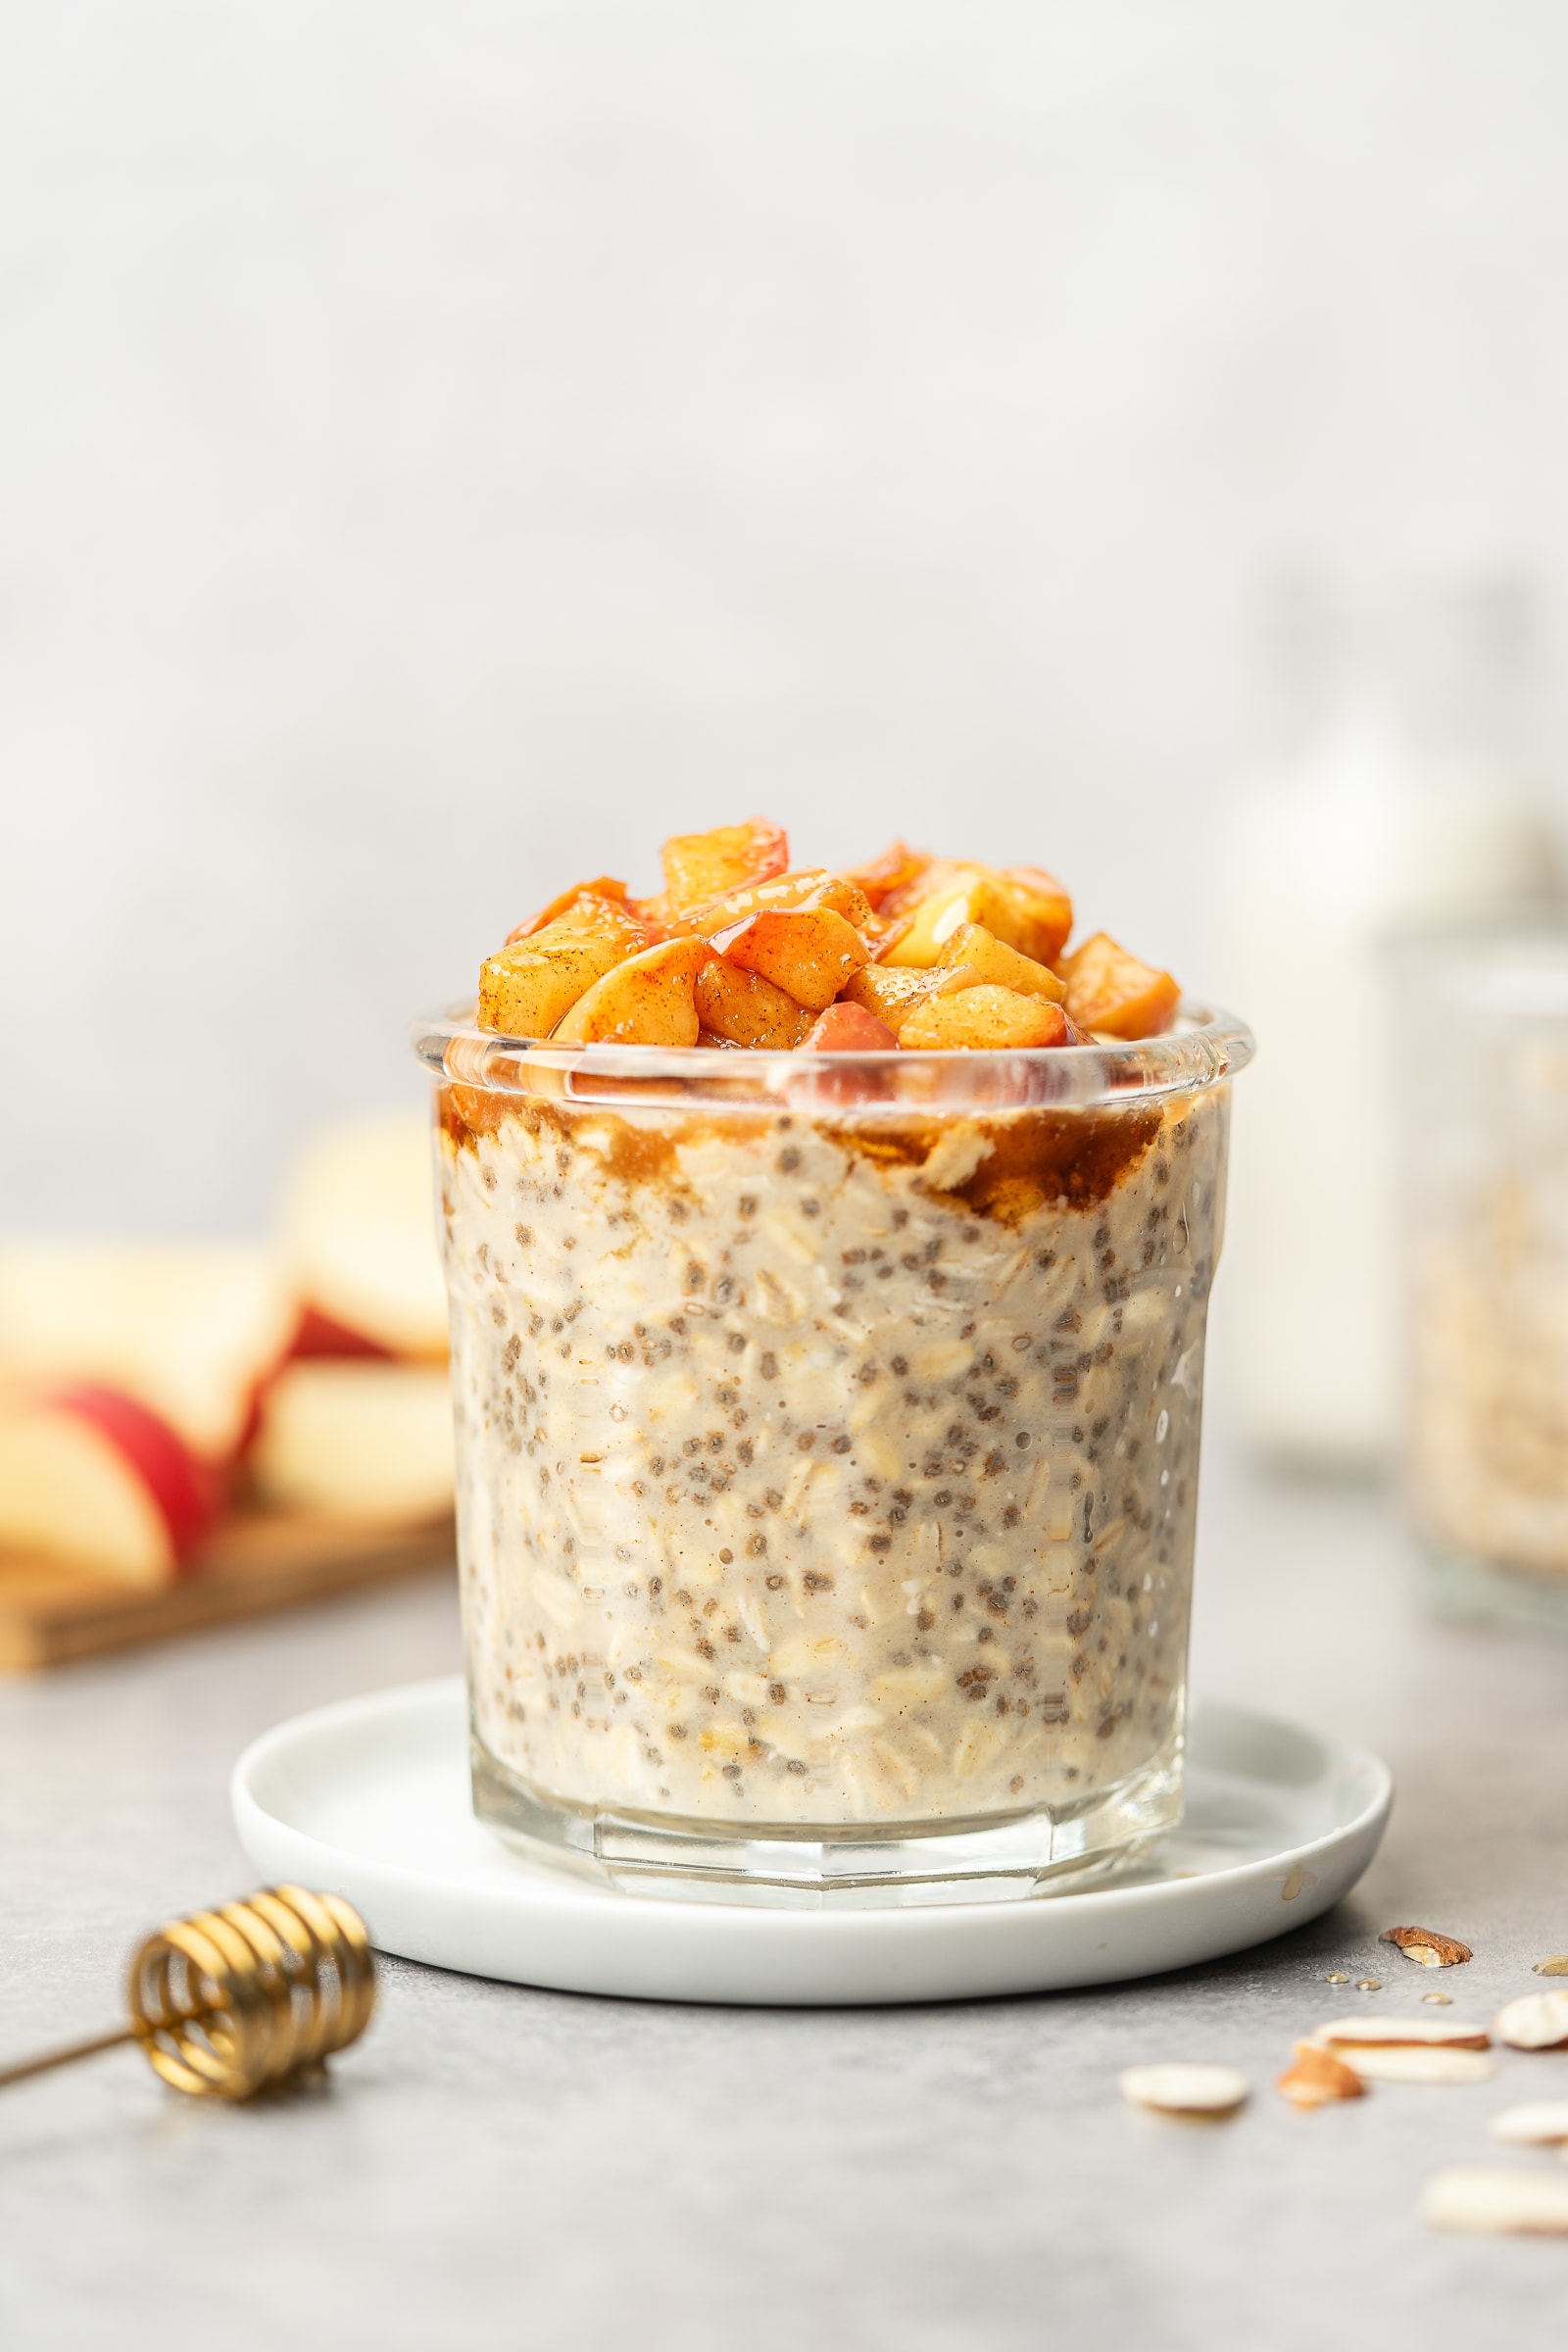 Overnight oats in a glass jar topped with cooked cinnamon apples.